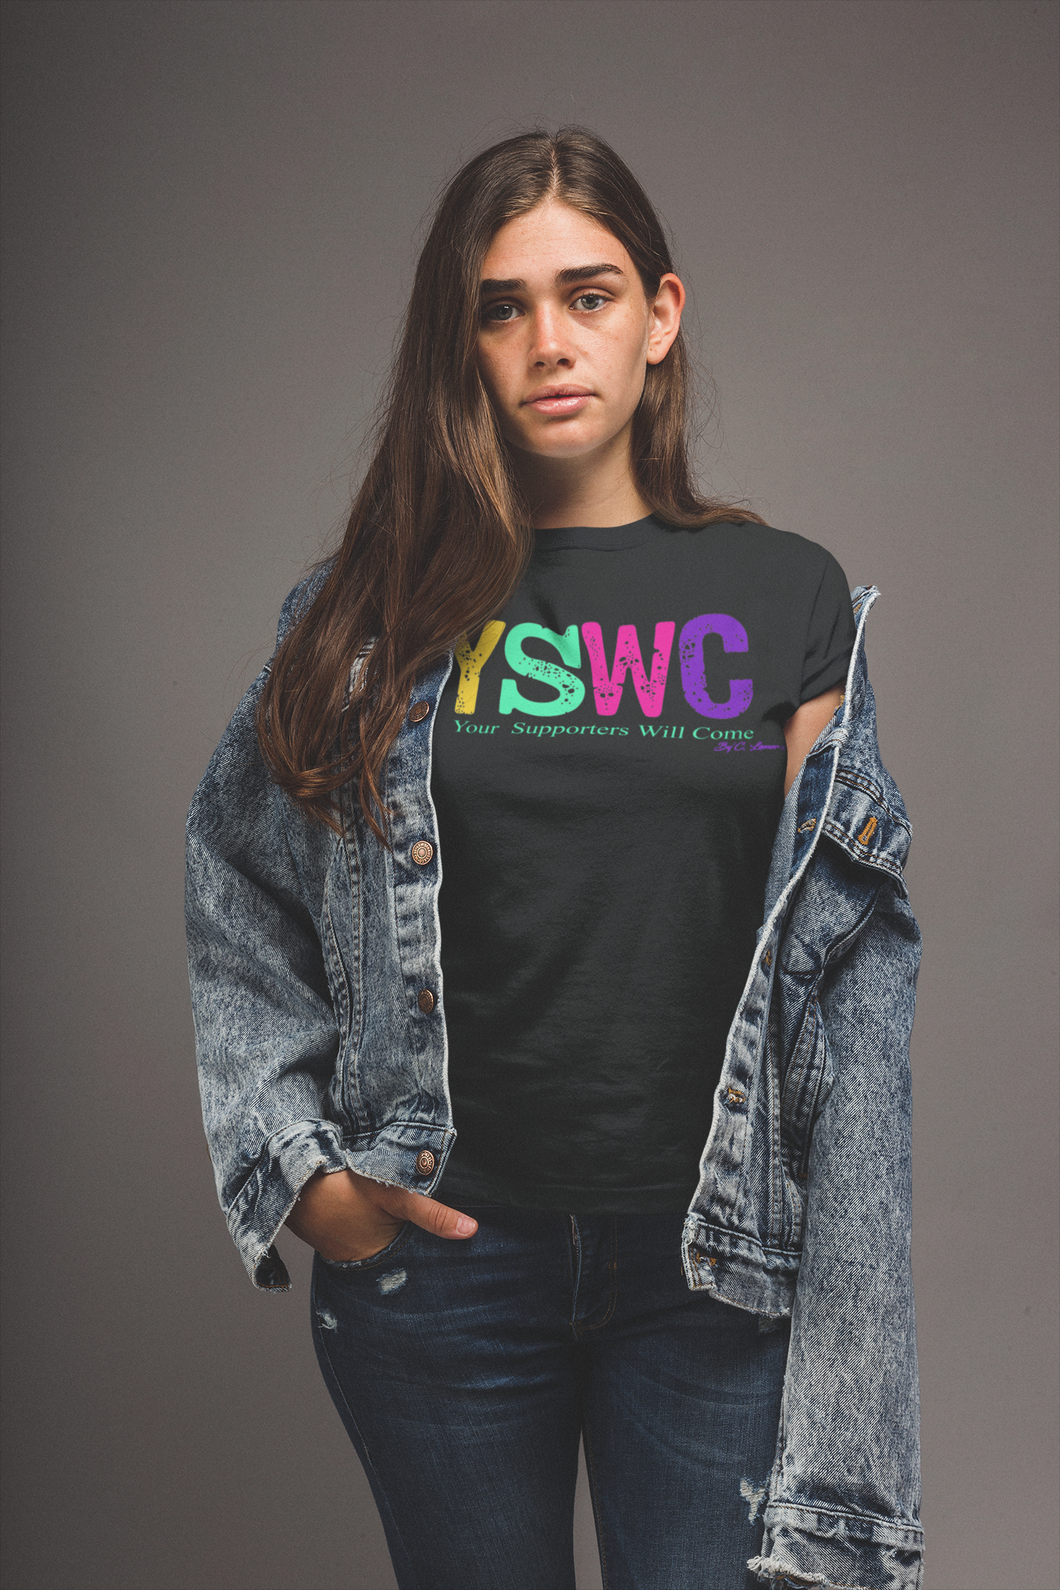 By' C. Lamor- YSWC Letter, Black tshirt, in the colors Yellow, Green, Pink and Purple for the Ladies